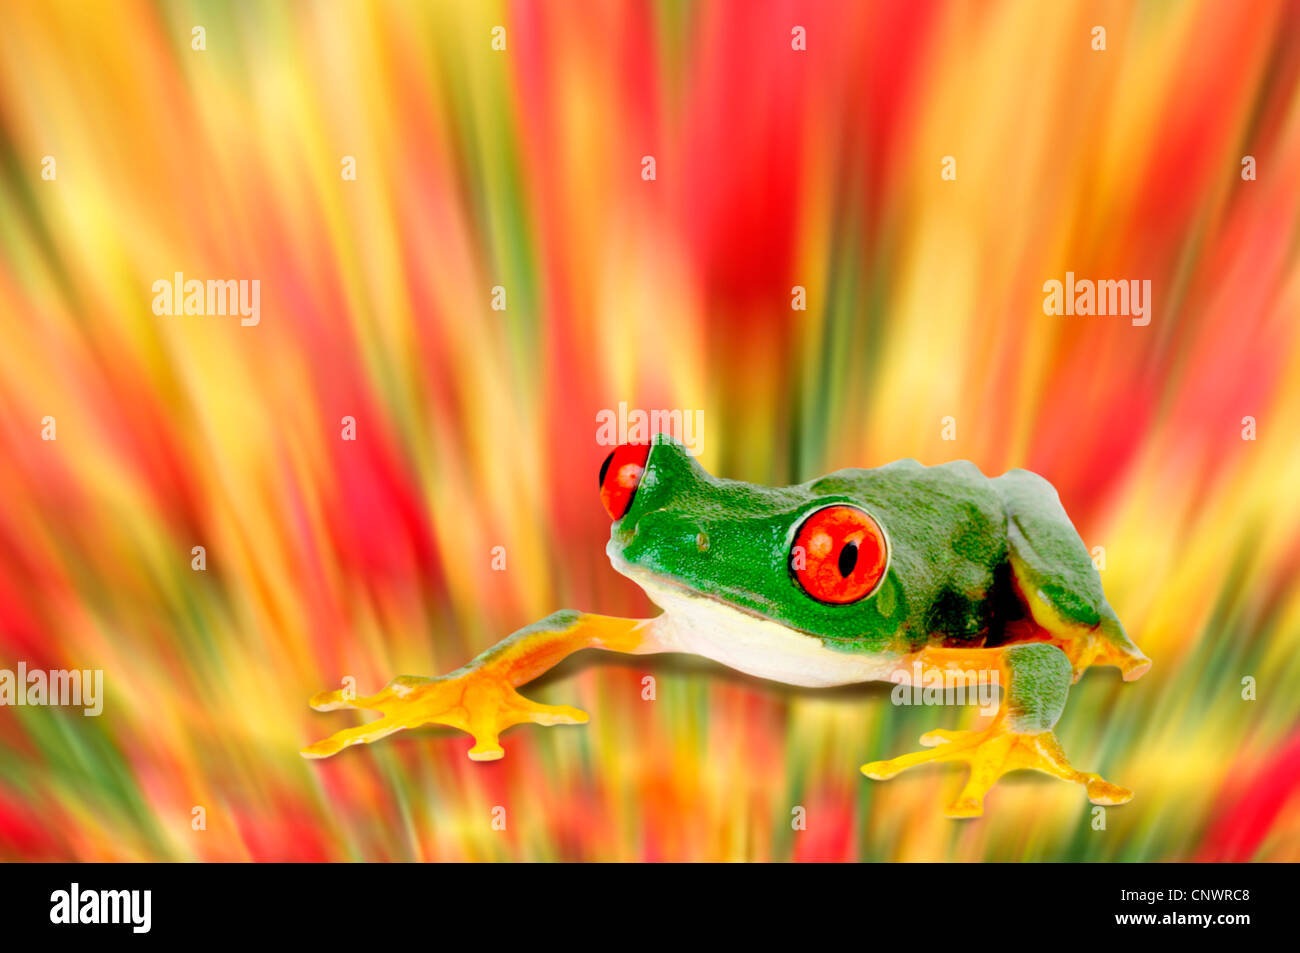 red-eyed treefrog, redeyed treefrog, redeye treefrog, red eye treefrog, red eyed frog (Agalychnis callidryas), in front of screaming moving background Stock Photo